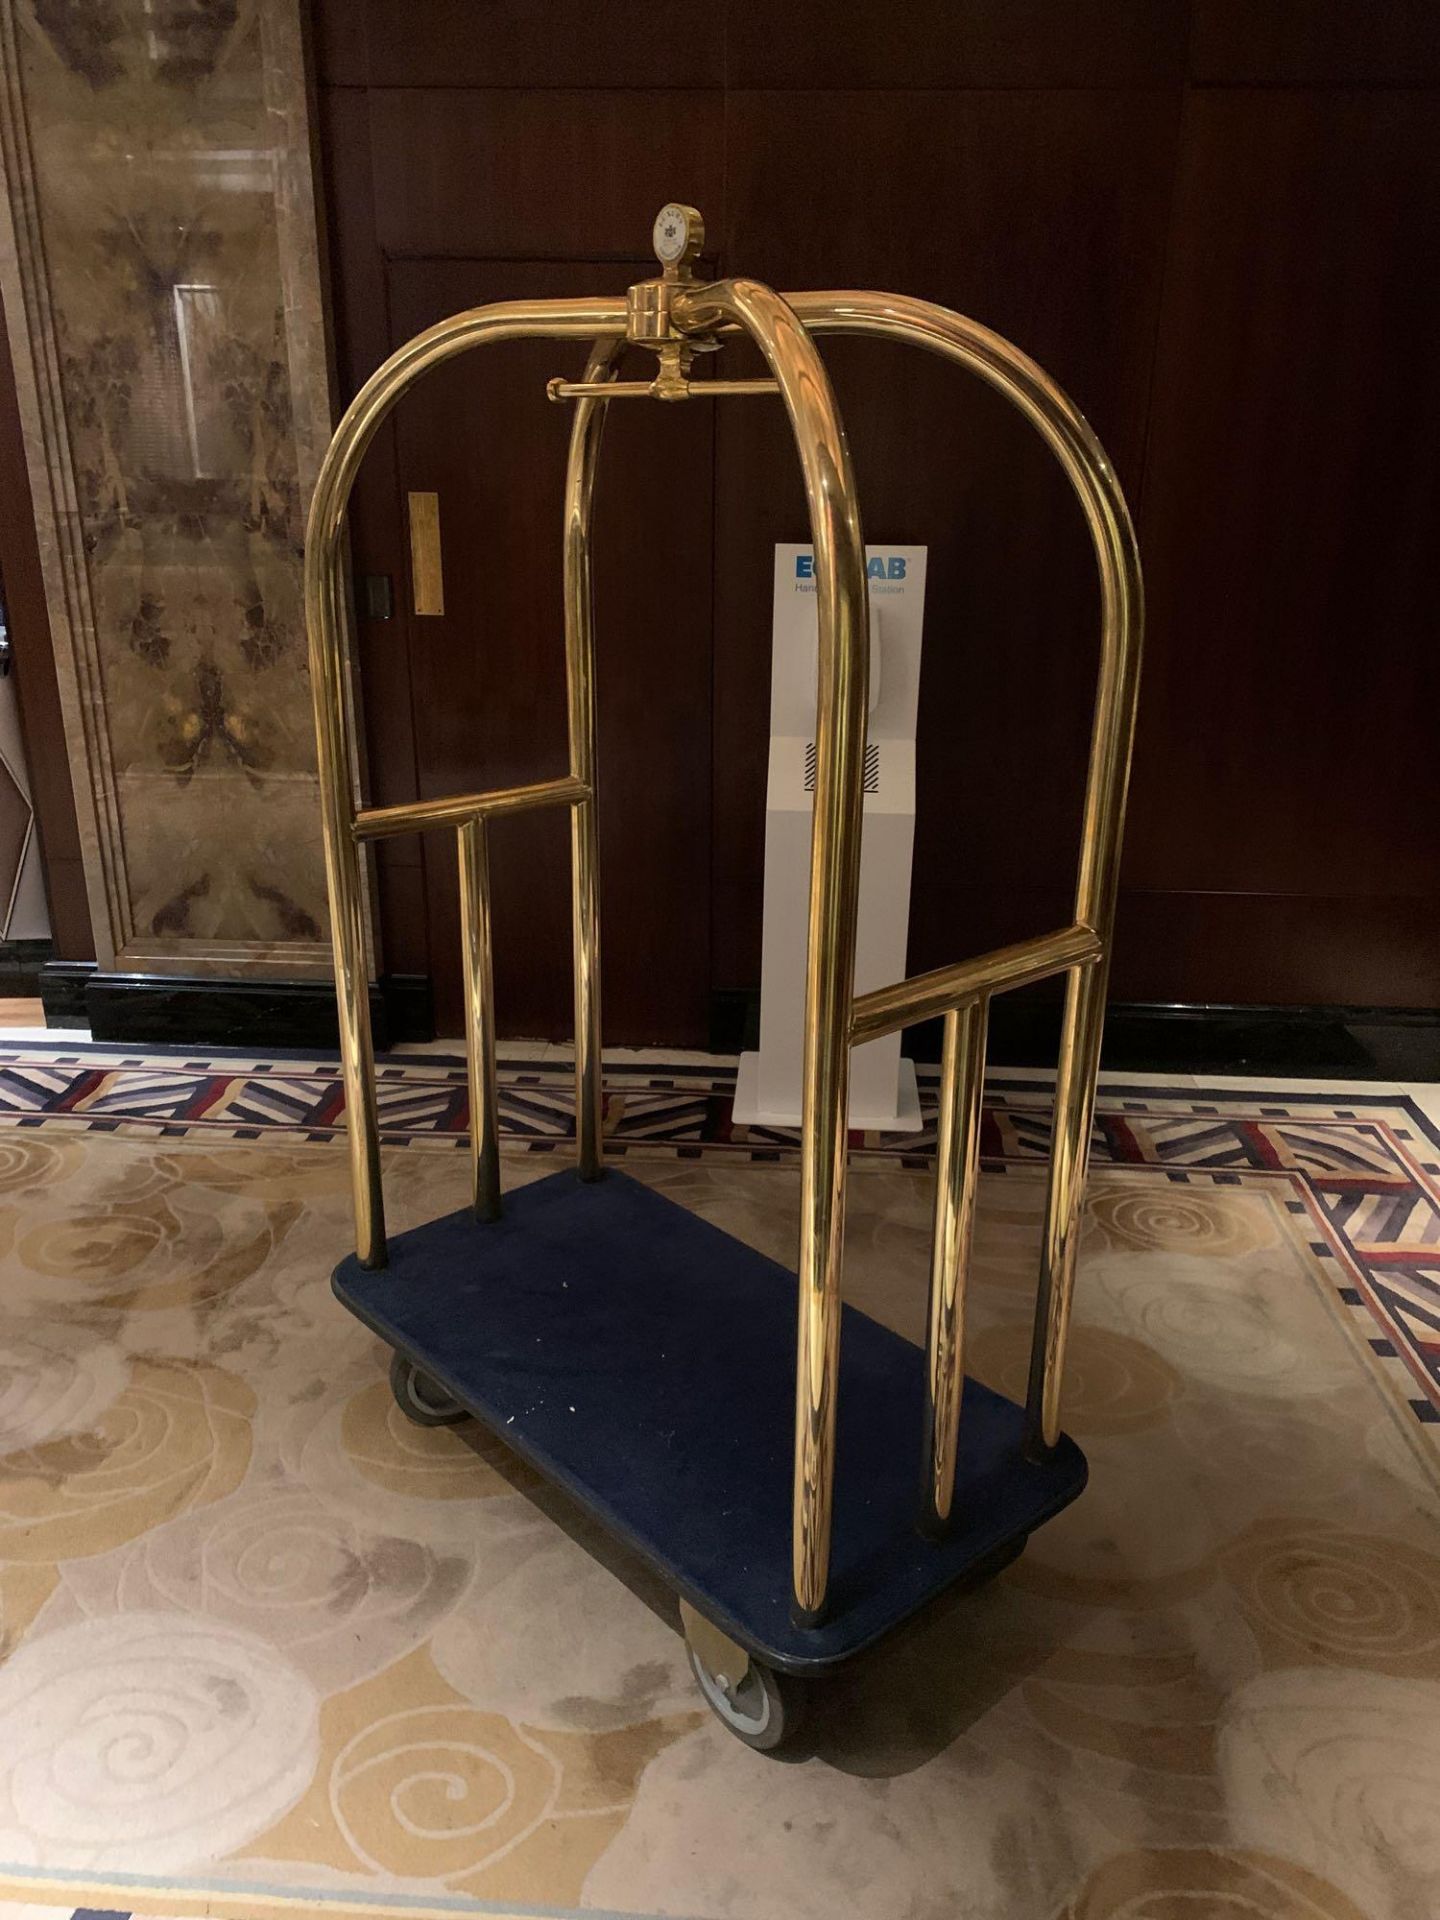 Brass Birdcage Trolley Concierge Cart With A Blue Velvet Pad 123x 63x 200cm ( Loc Lobby) - Image 3 of 4